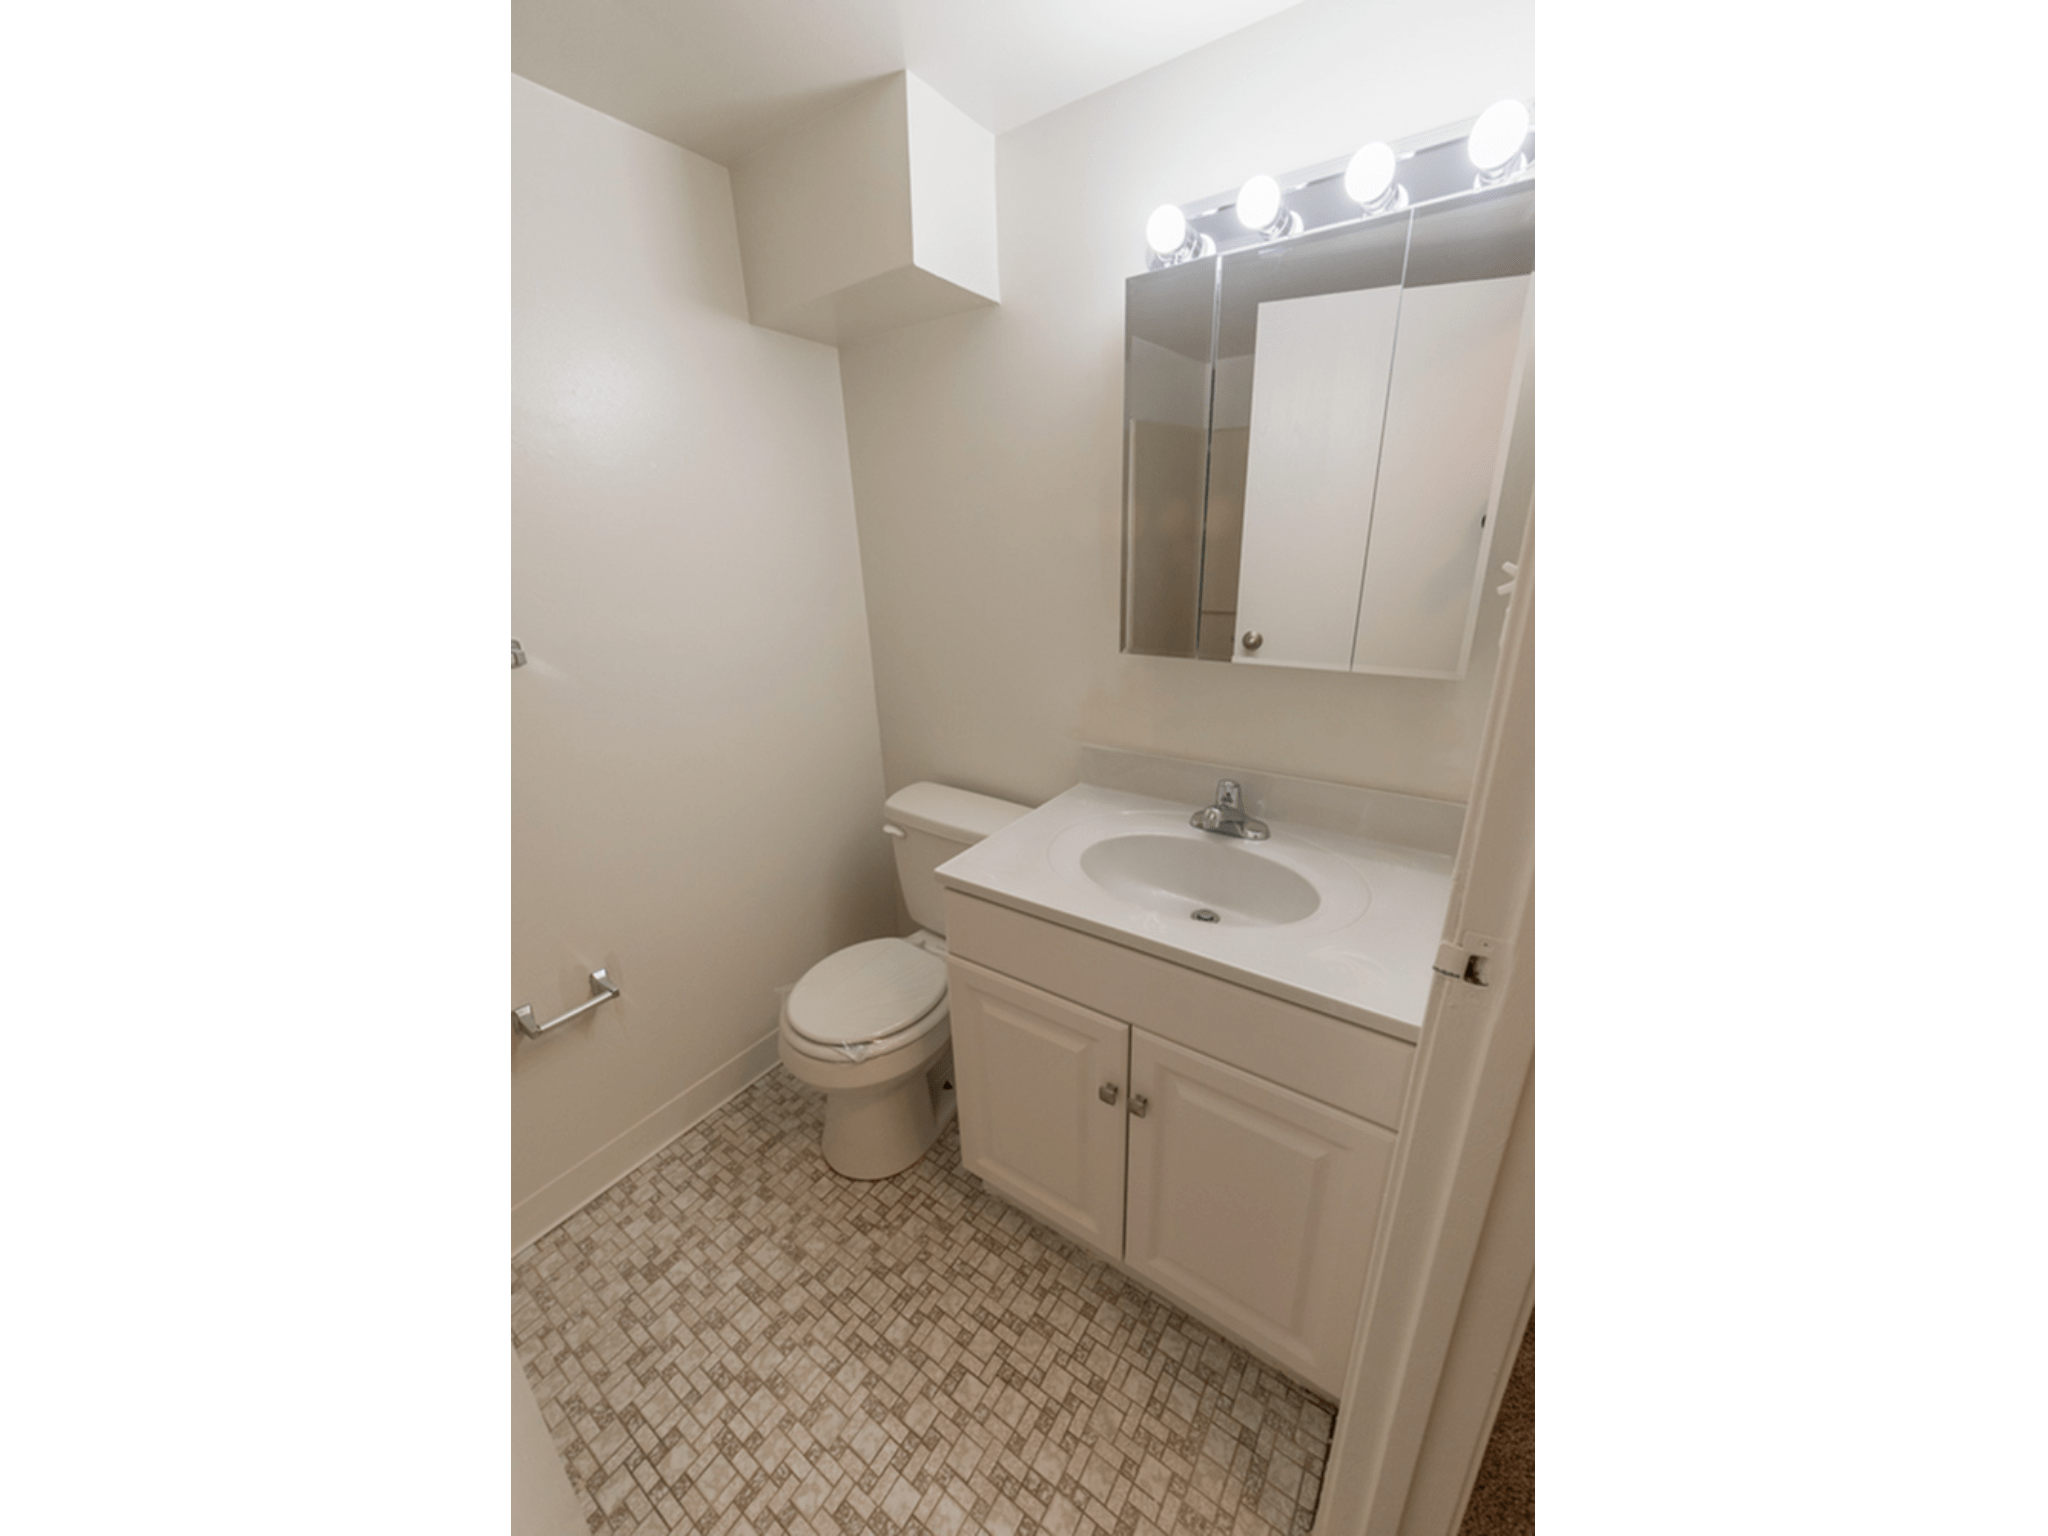 Bathroom at Winslow House apartments with tiled floors